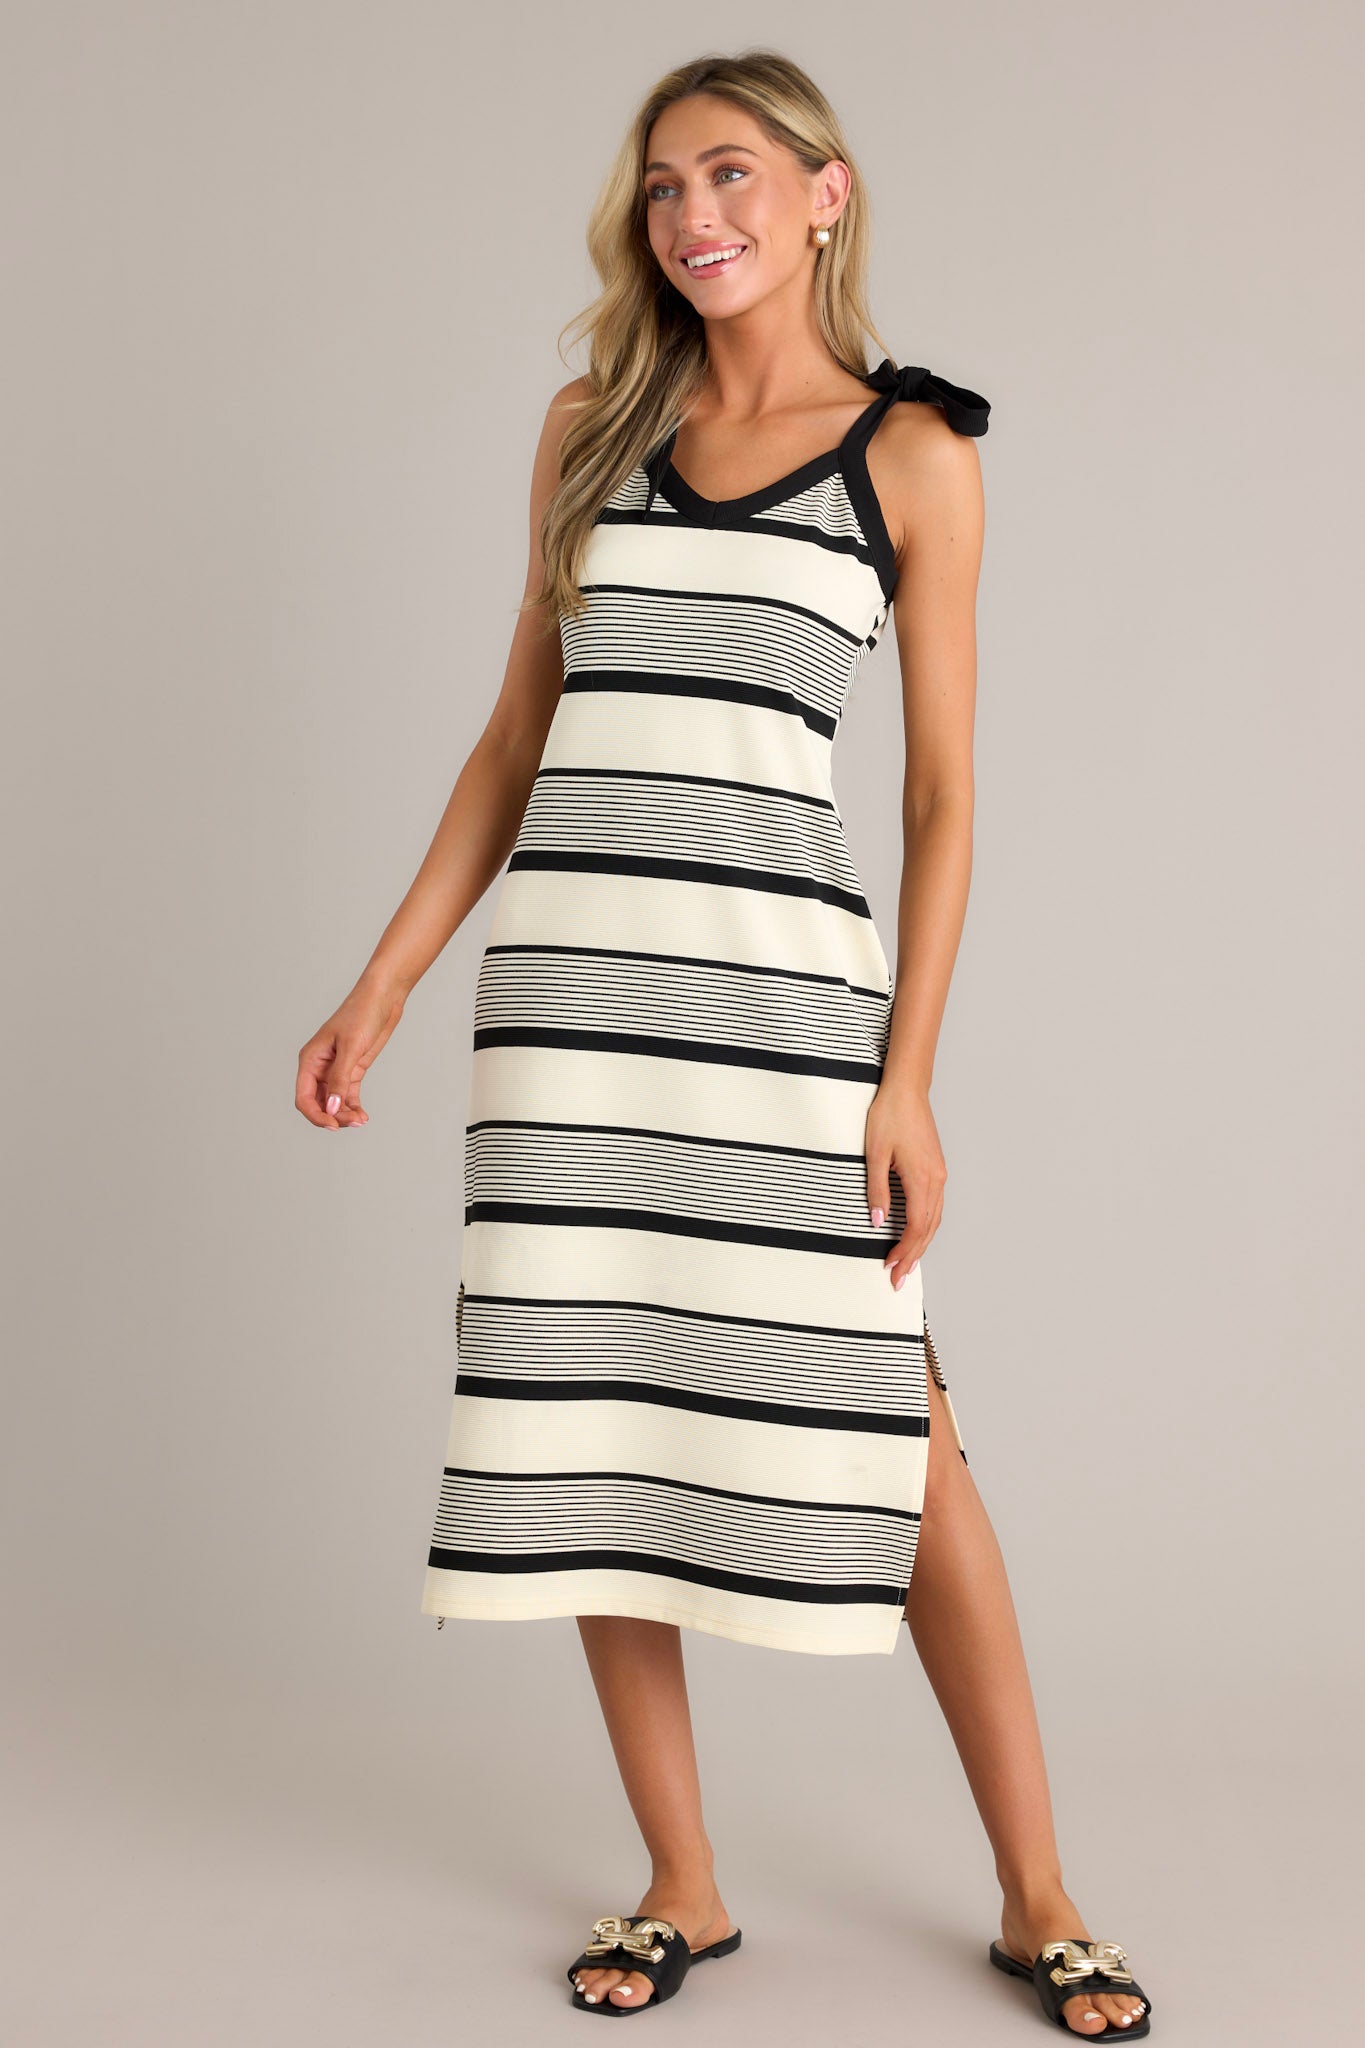 Action shot of a black striped midi dress displaying the fit and movement, highlighting the v-neckline, thick self-tie straps, unique stripe pattern, and side slits.